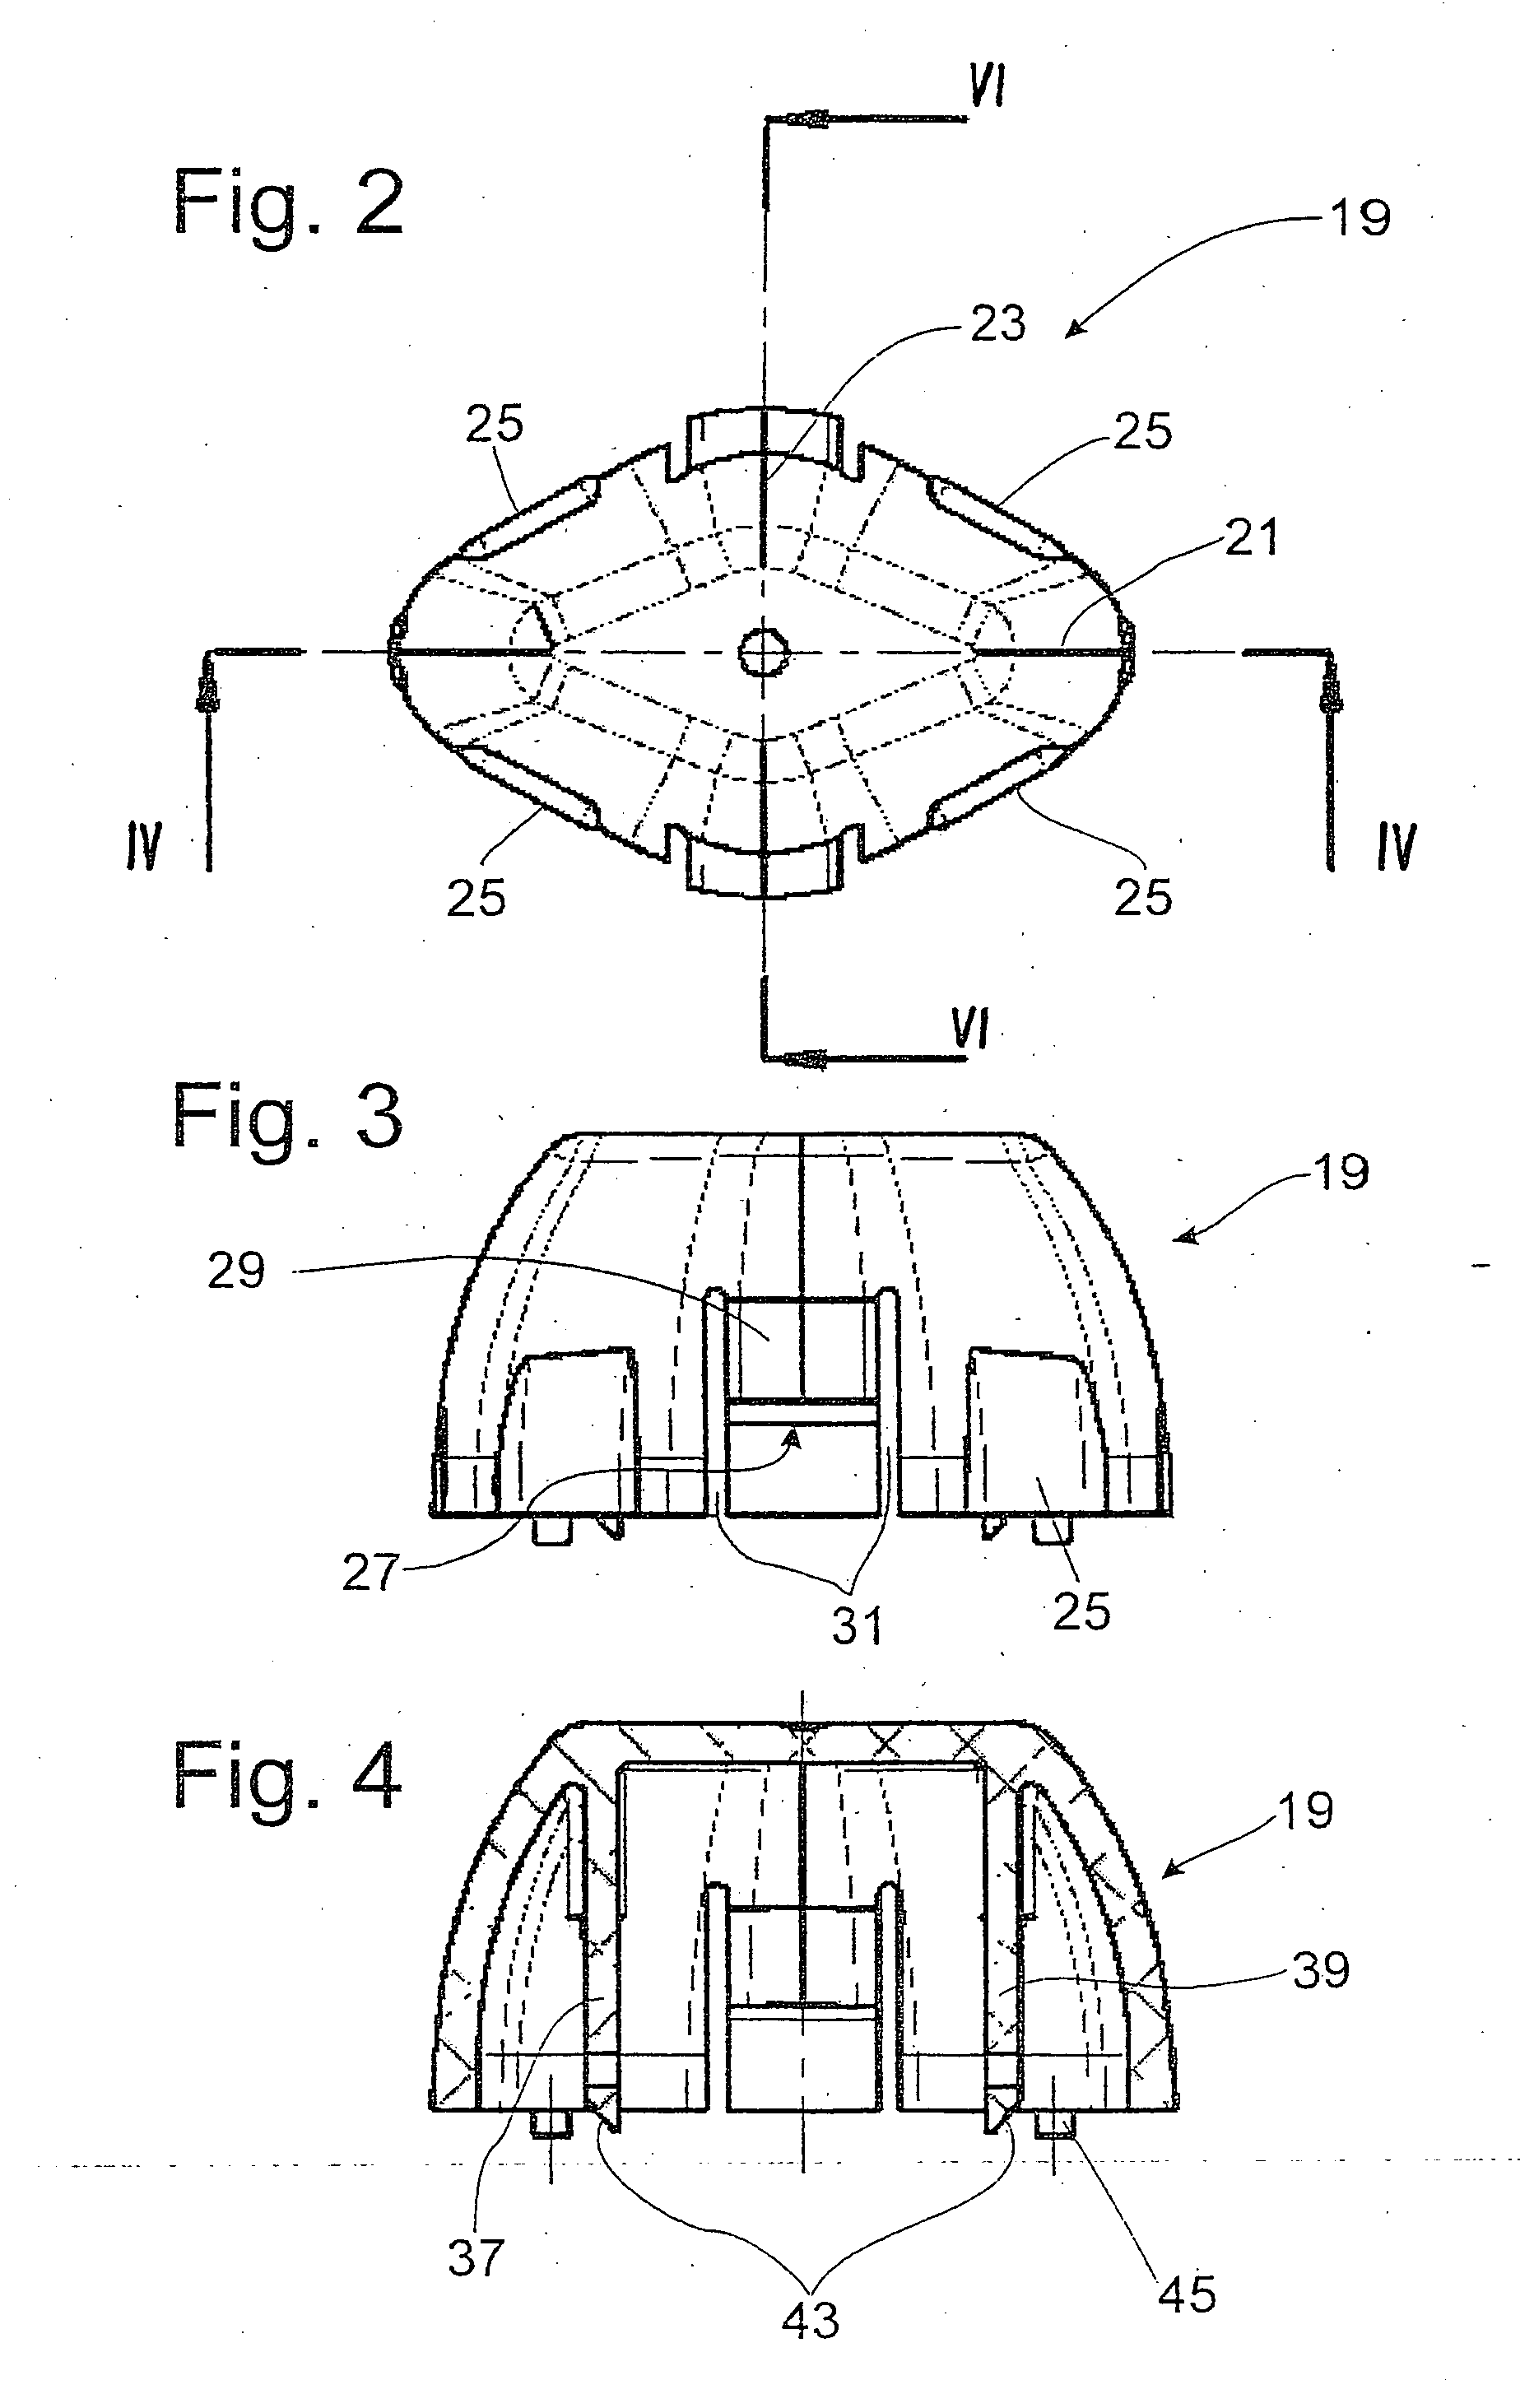 Mounting assembly for a vibration damper